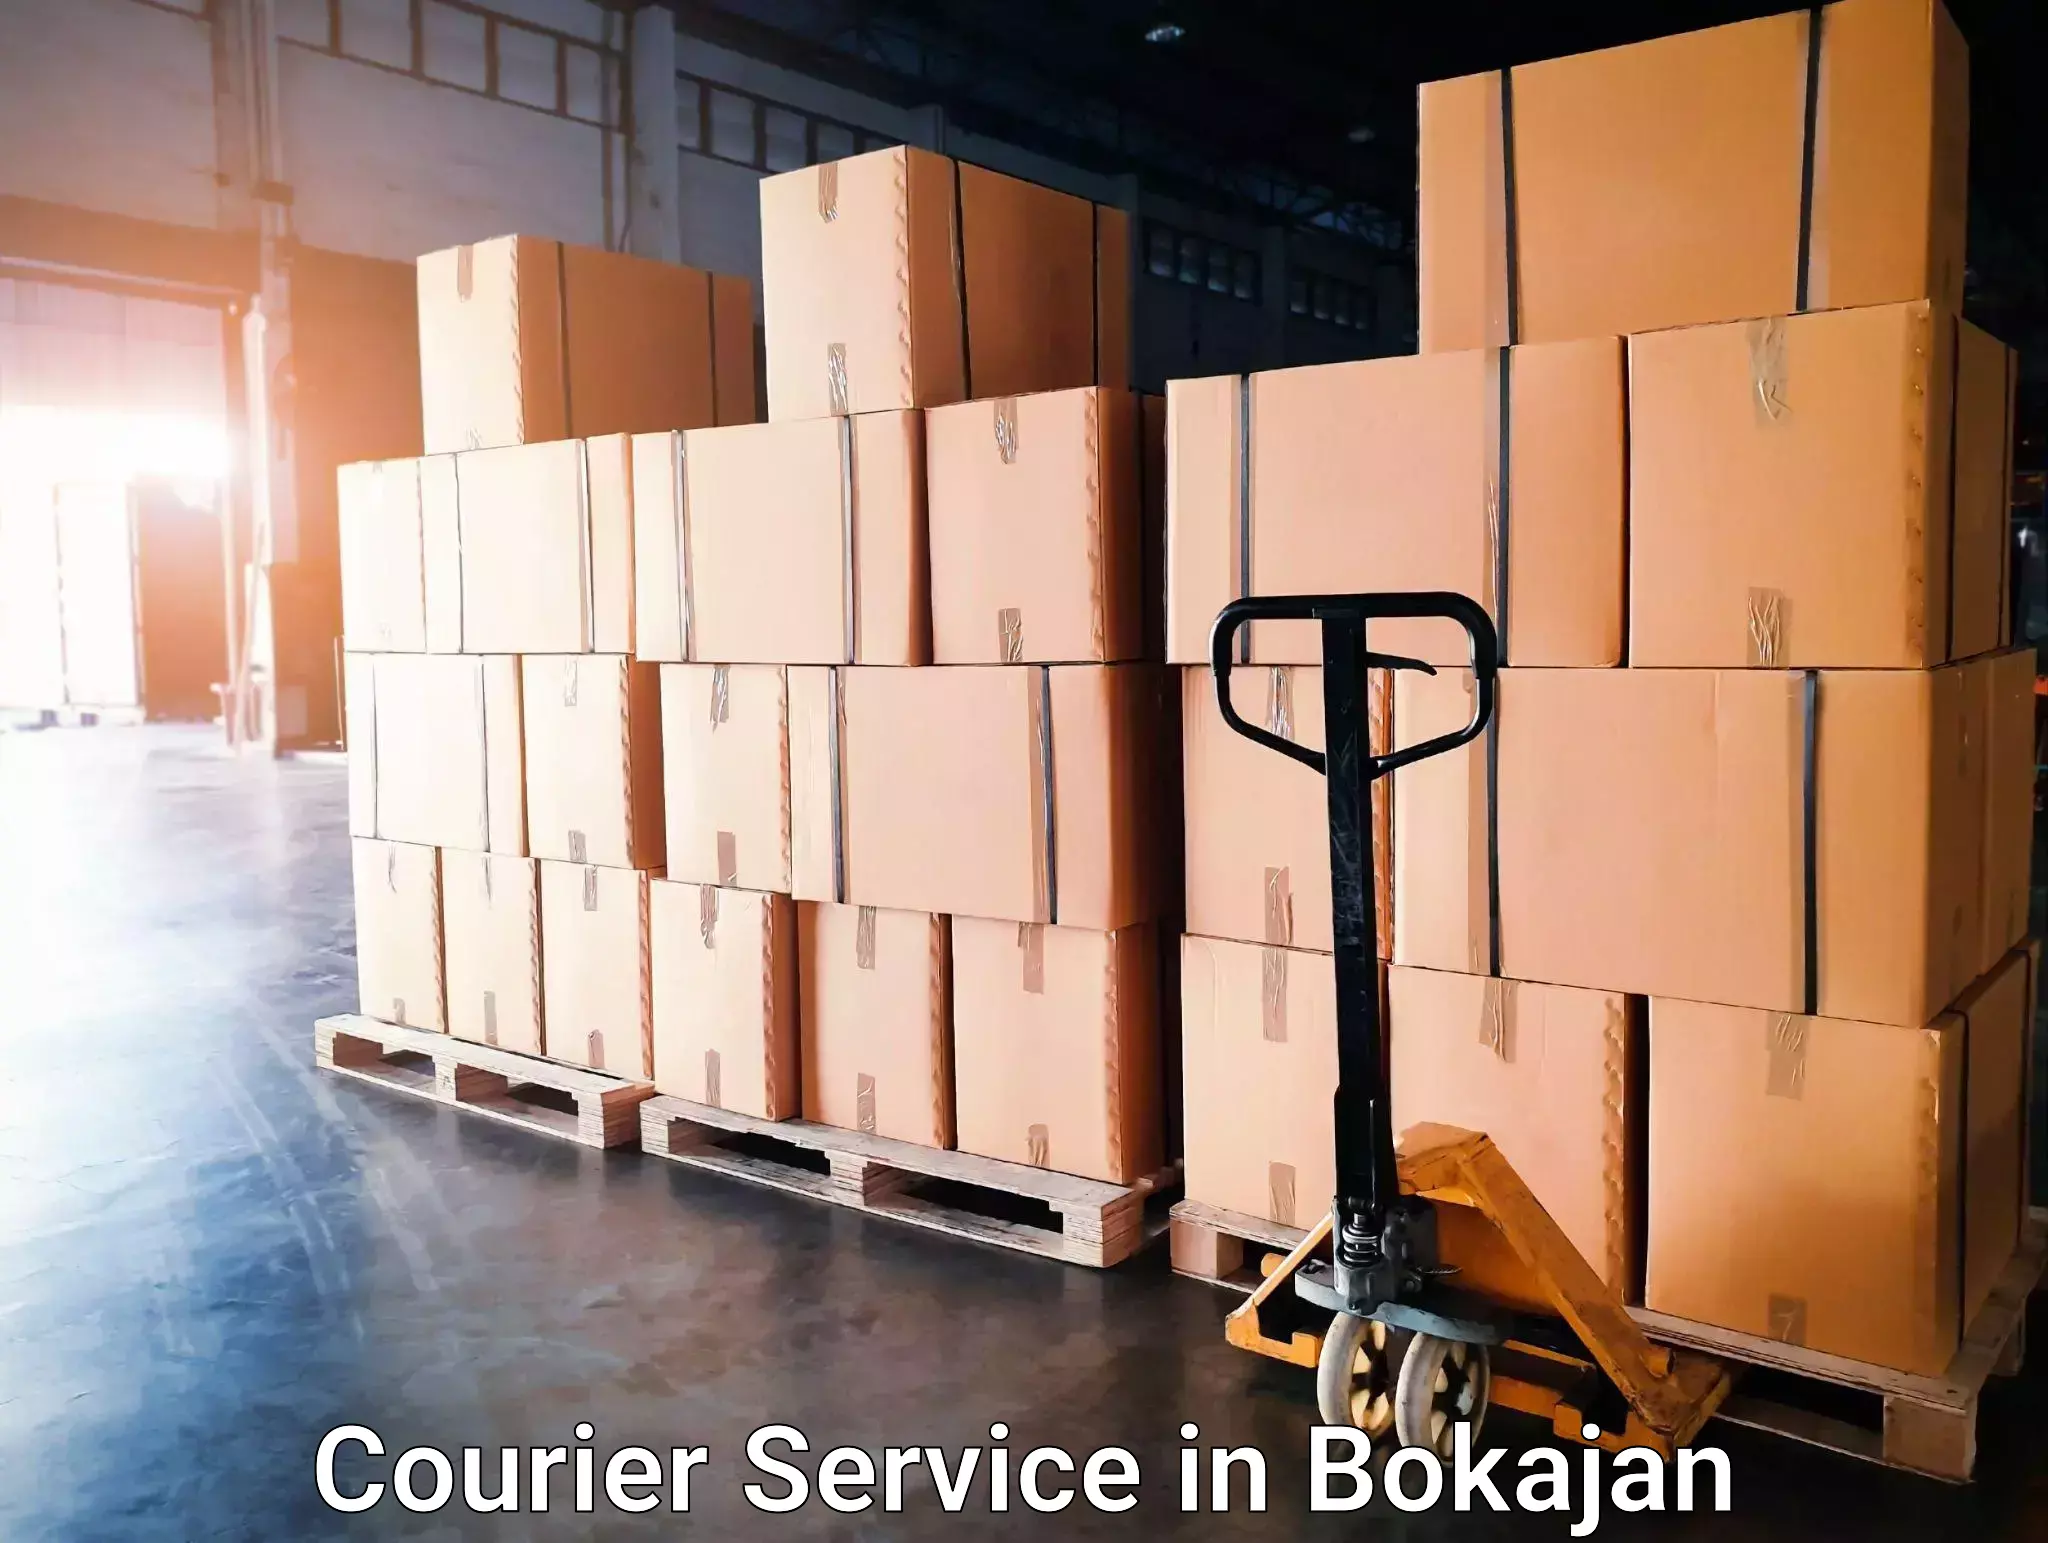 Small business couriers in Bokajan